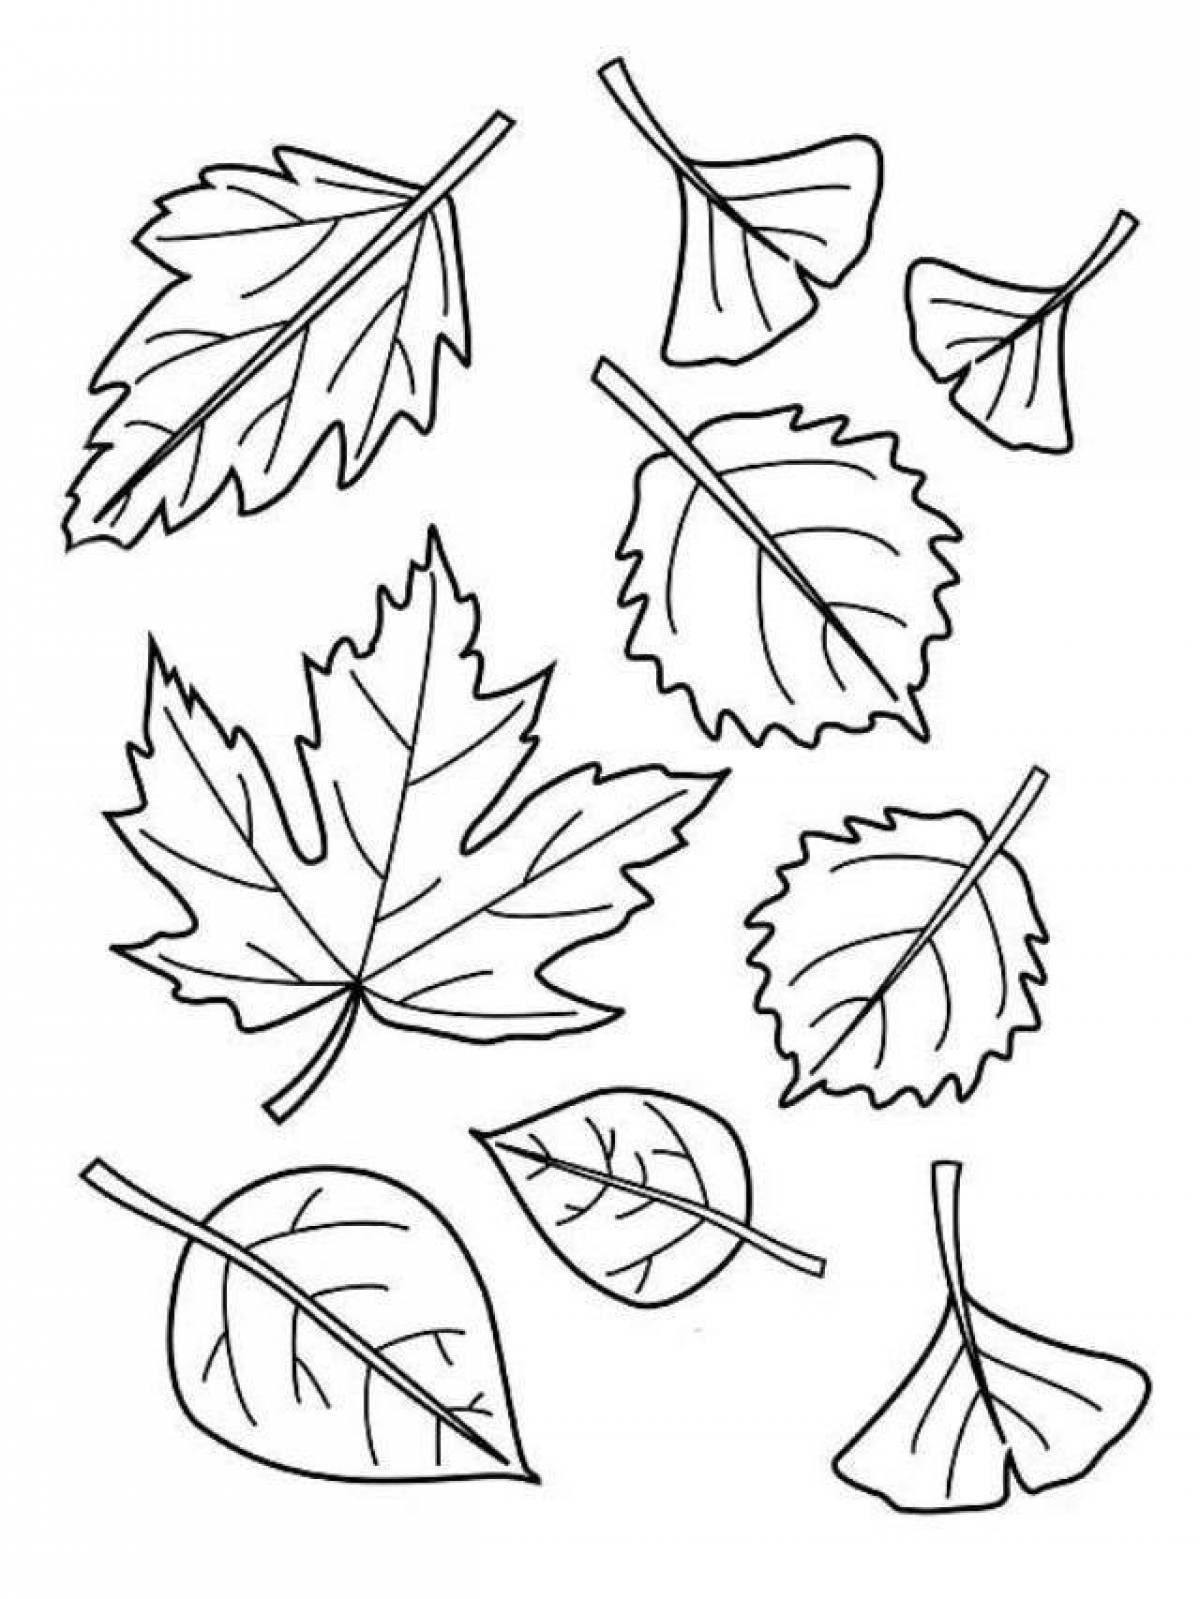 Fat leaves coloring book for kids